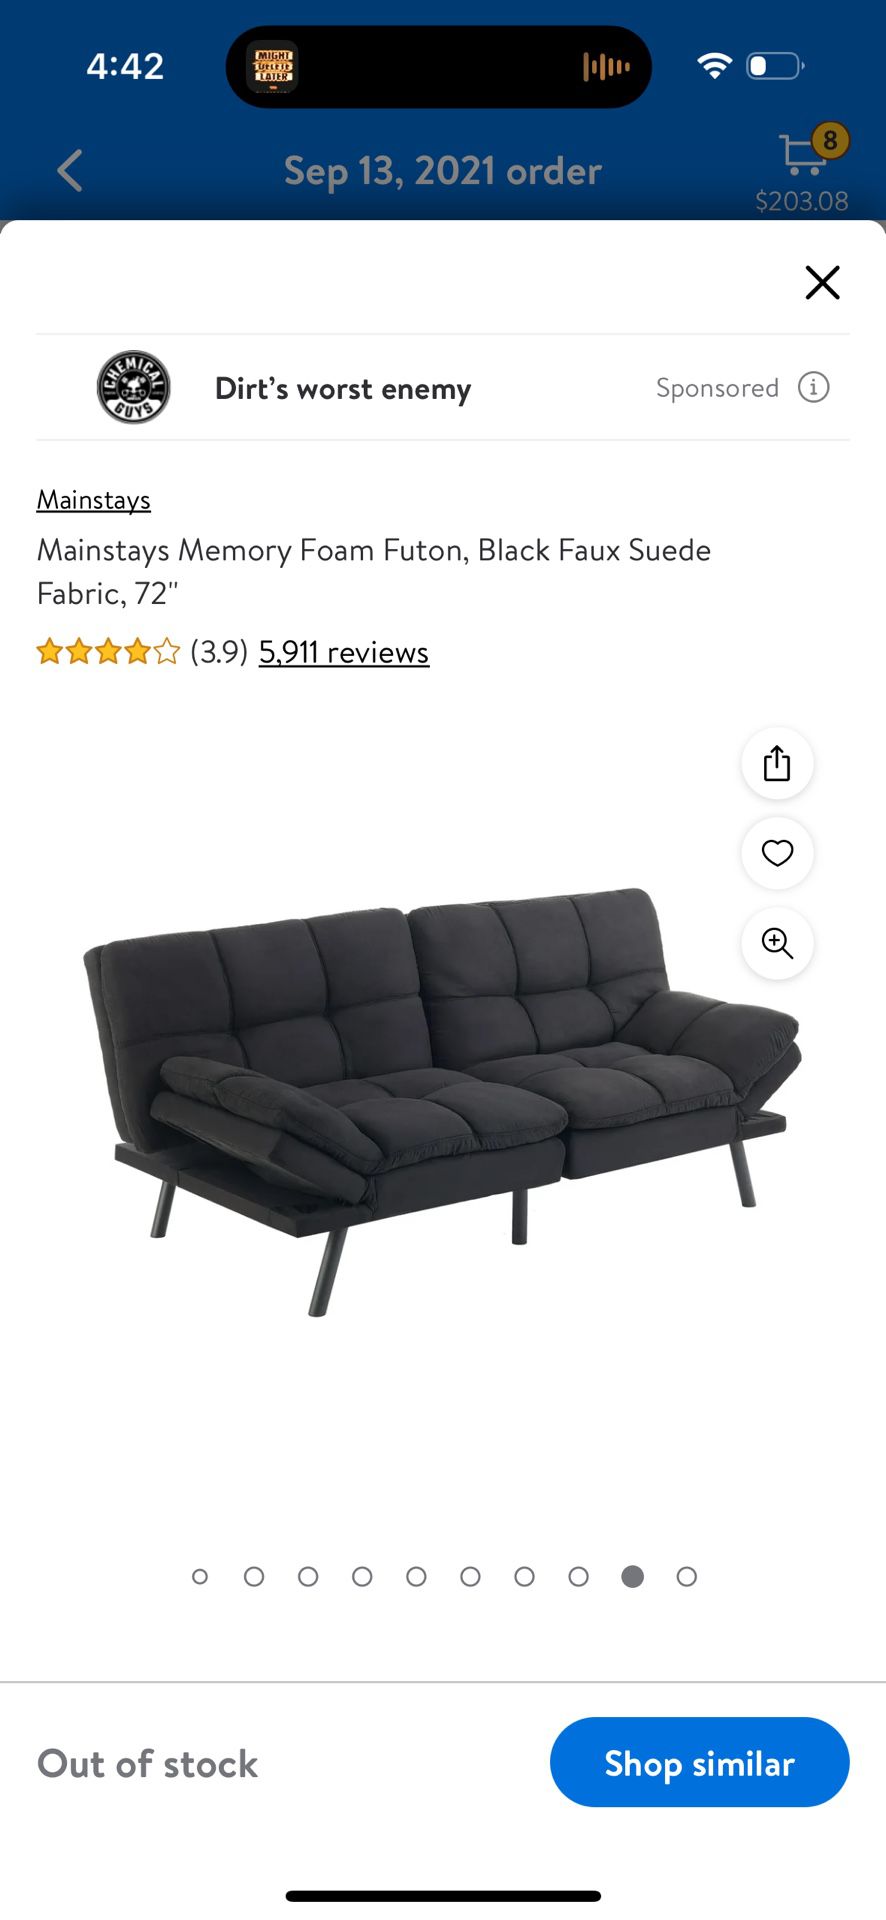 small black couch